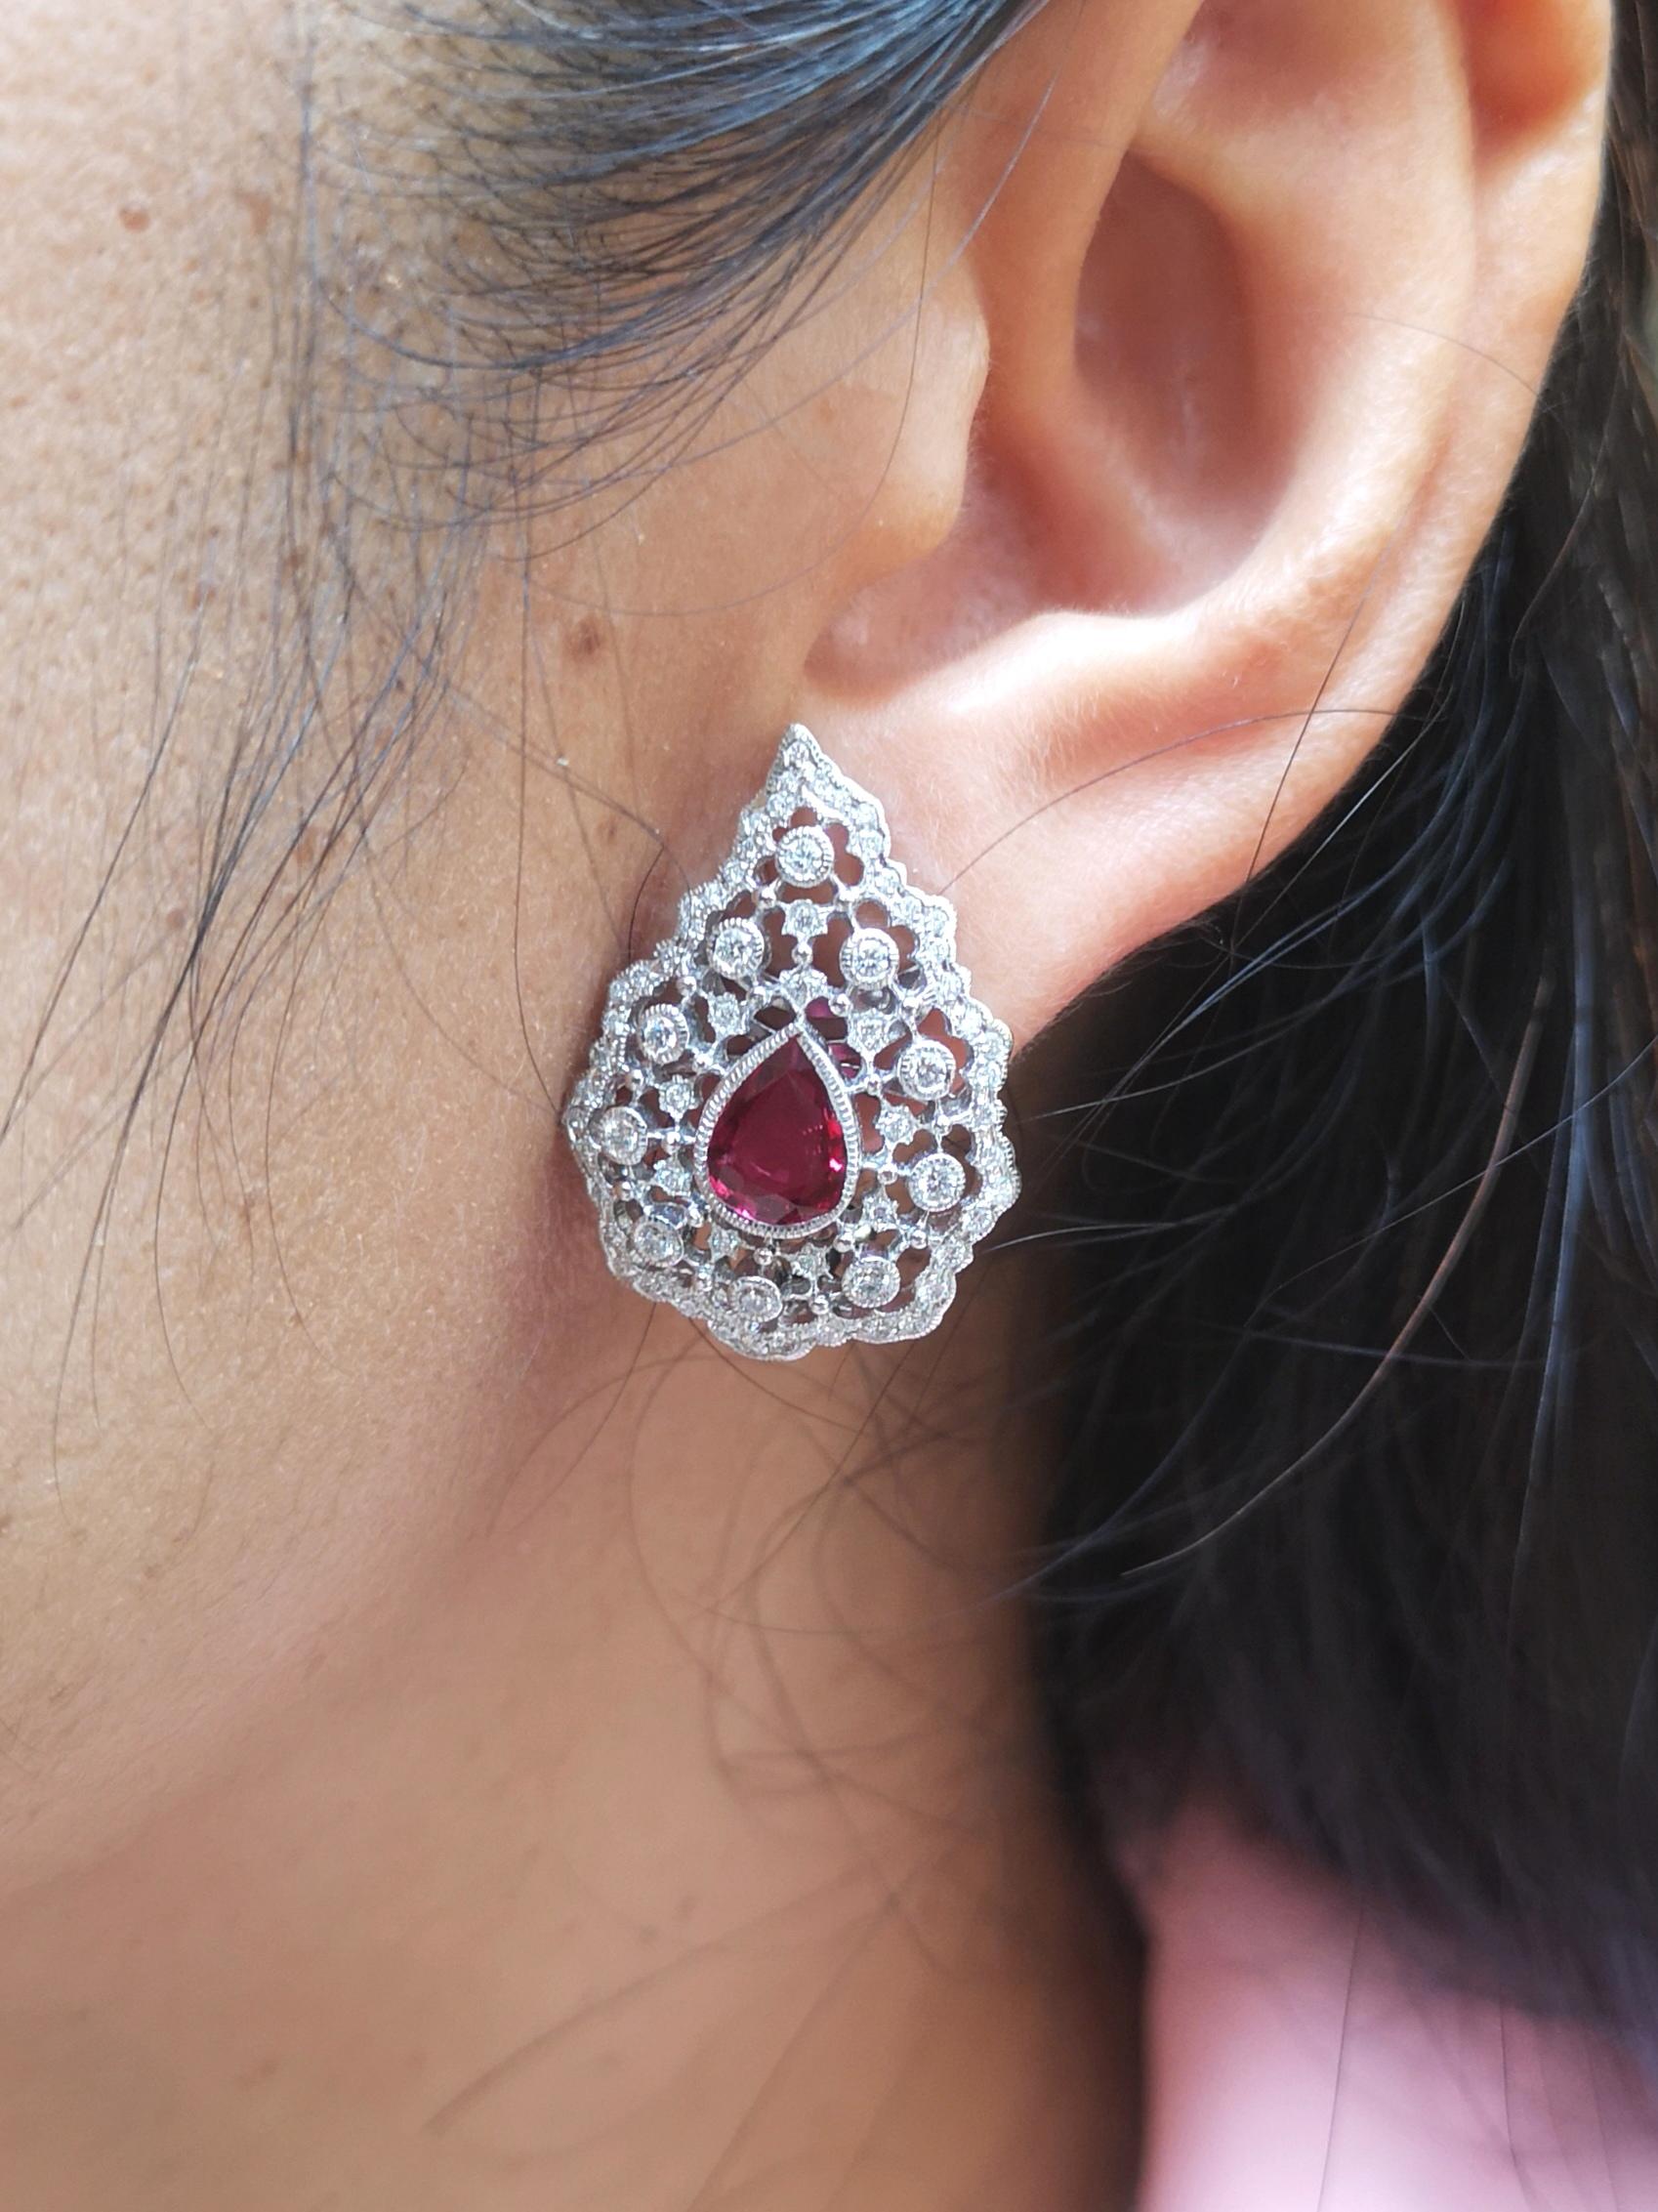 Ruby 2.93 carats with Diamond 0.95 carat Earrings set in 18 Karat White Gold Settings

Width:  2.0 cm 
Length: 2.8 cm
Total Weight: 13.2 grams

